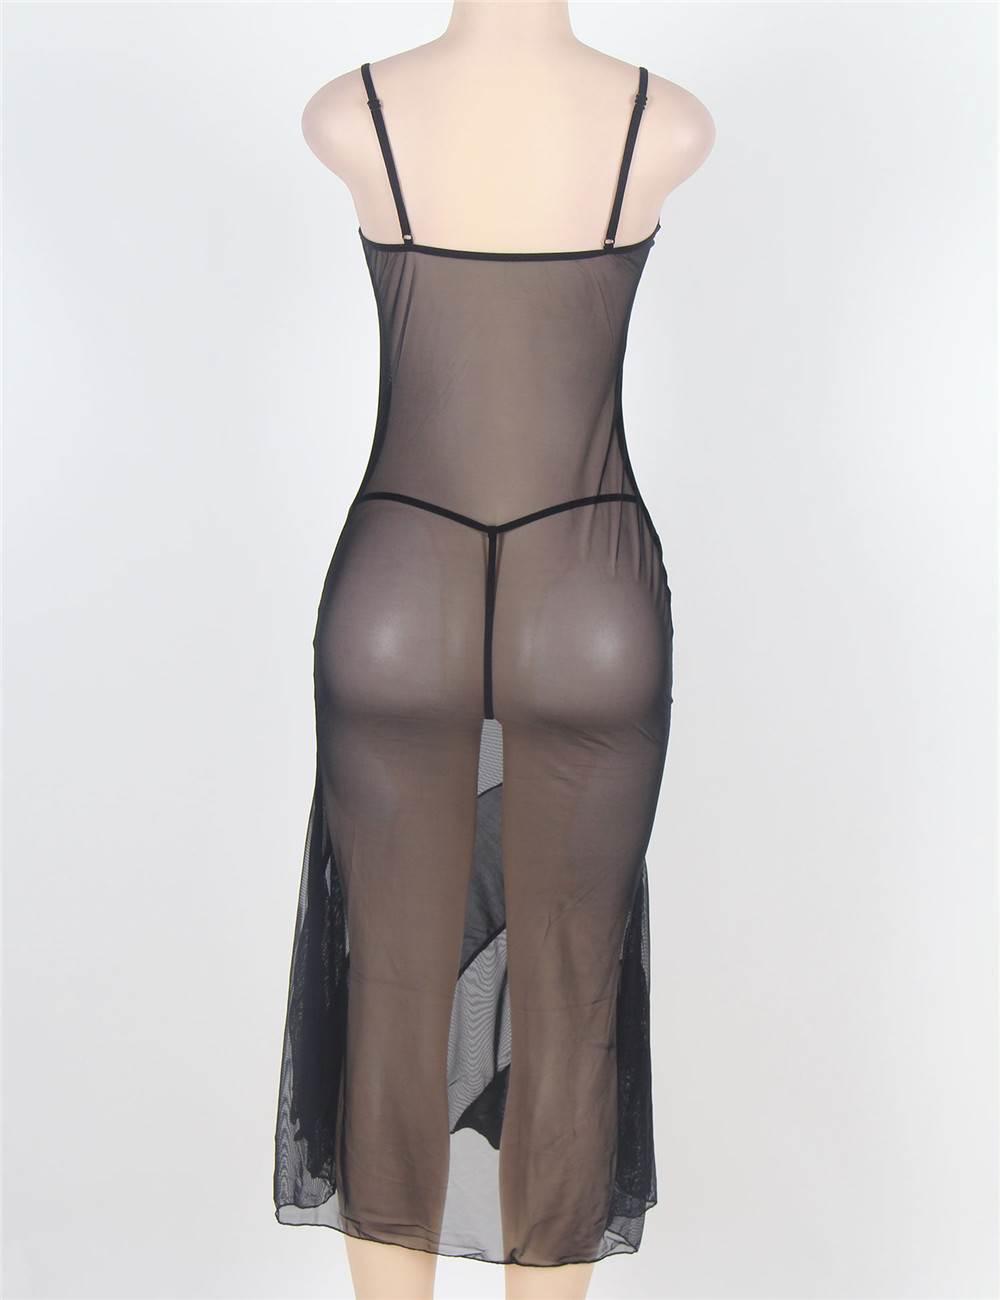 Soiree Long Black Nightgown from behind